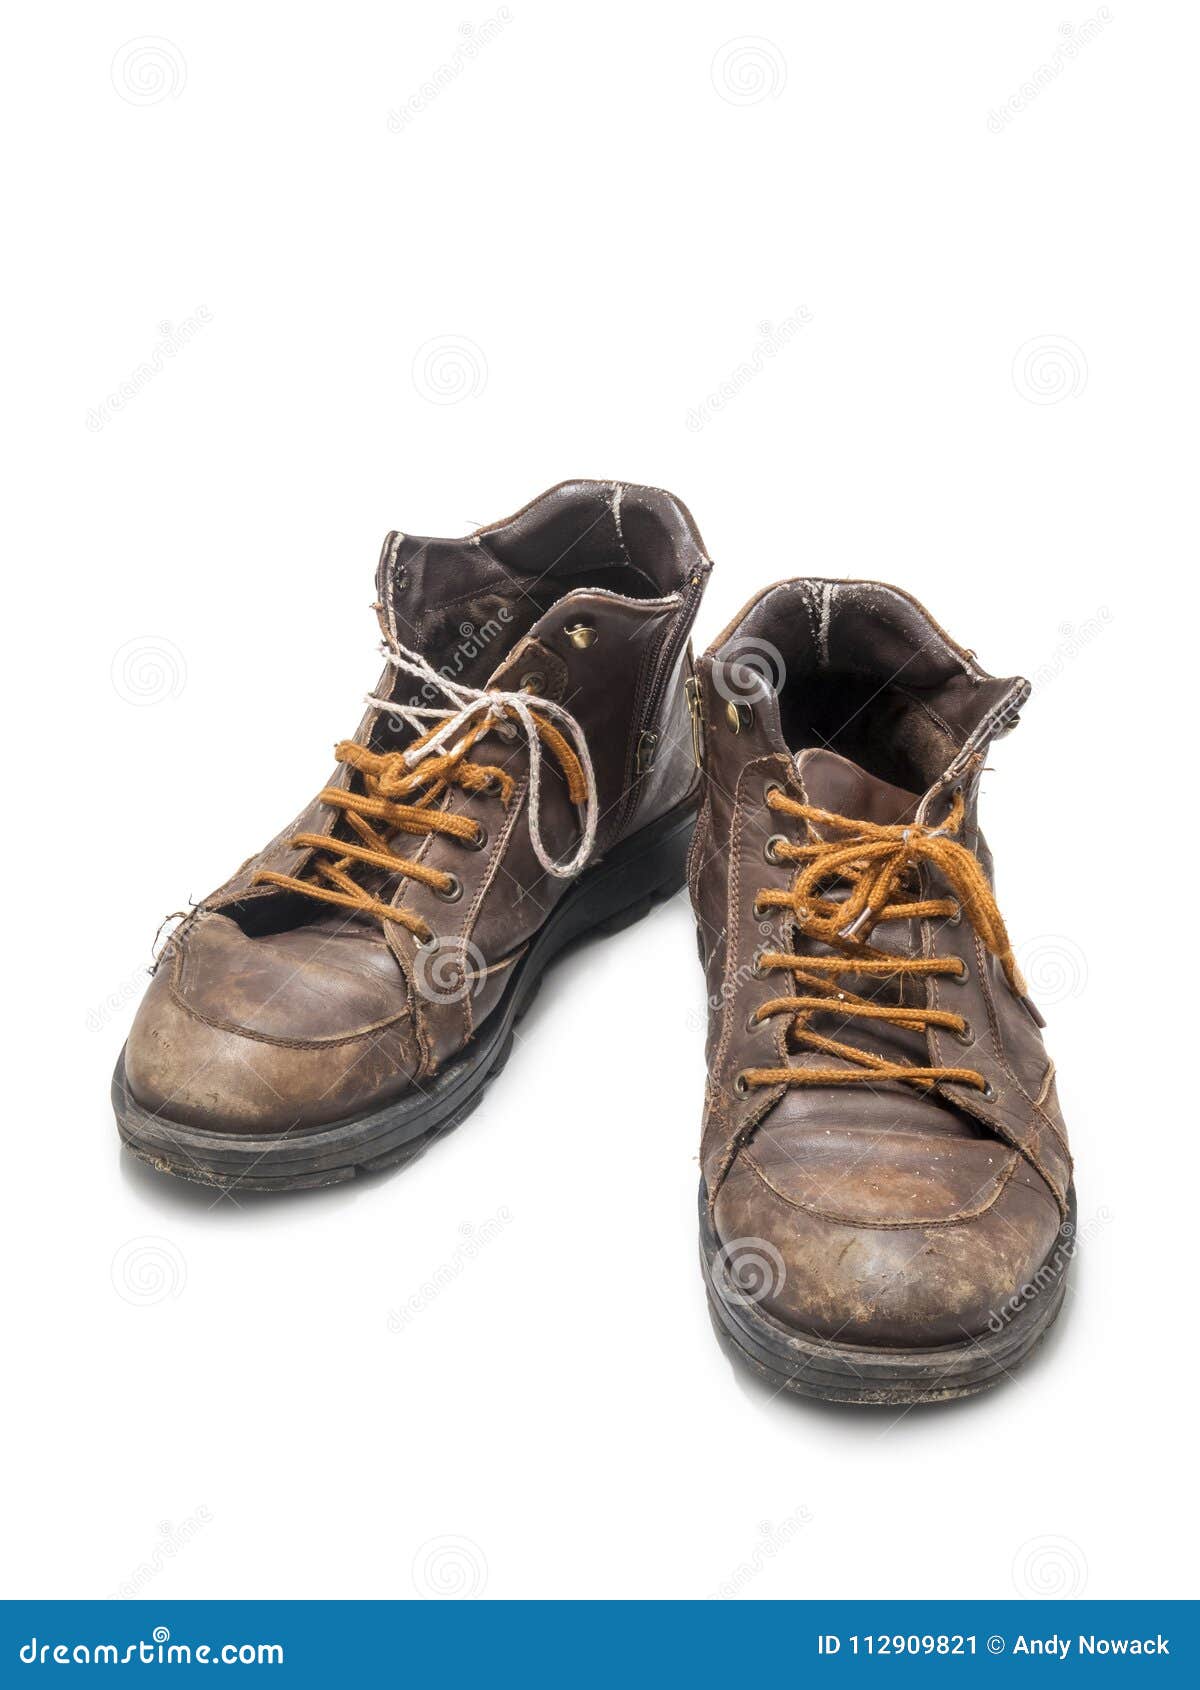 Old Leather Shoes Vertical on White Background Stock Image - Image of ...